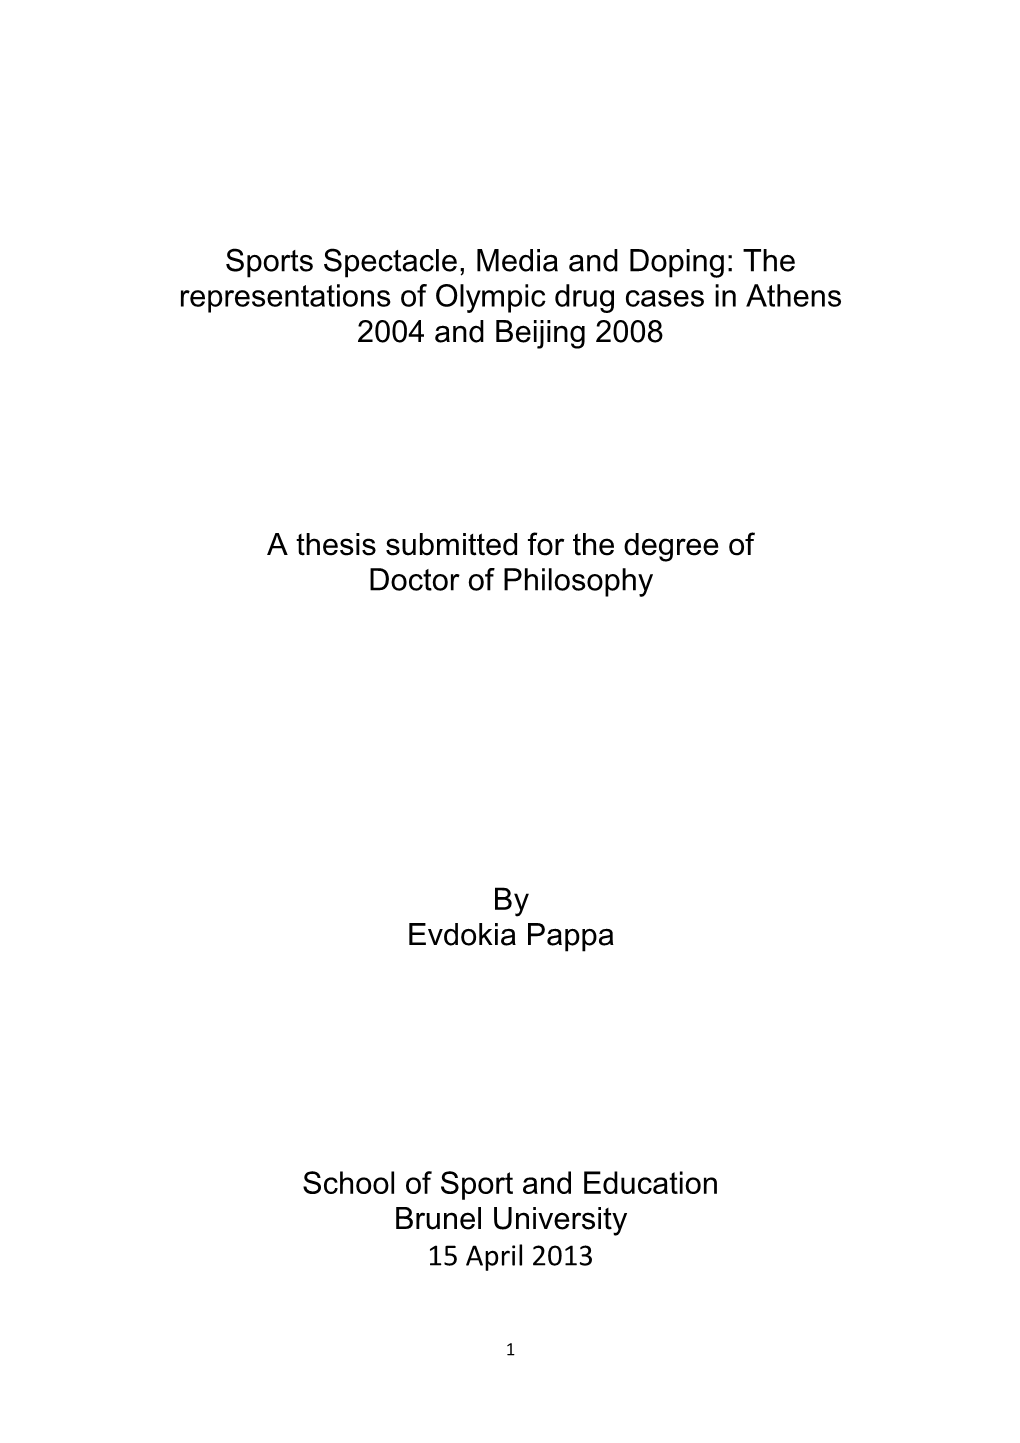 Sports Spectacle, Media and Doping: the Representations of Olympic Drug Cases in Athens 2004 and Beijing 2008